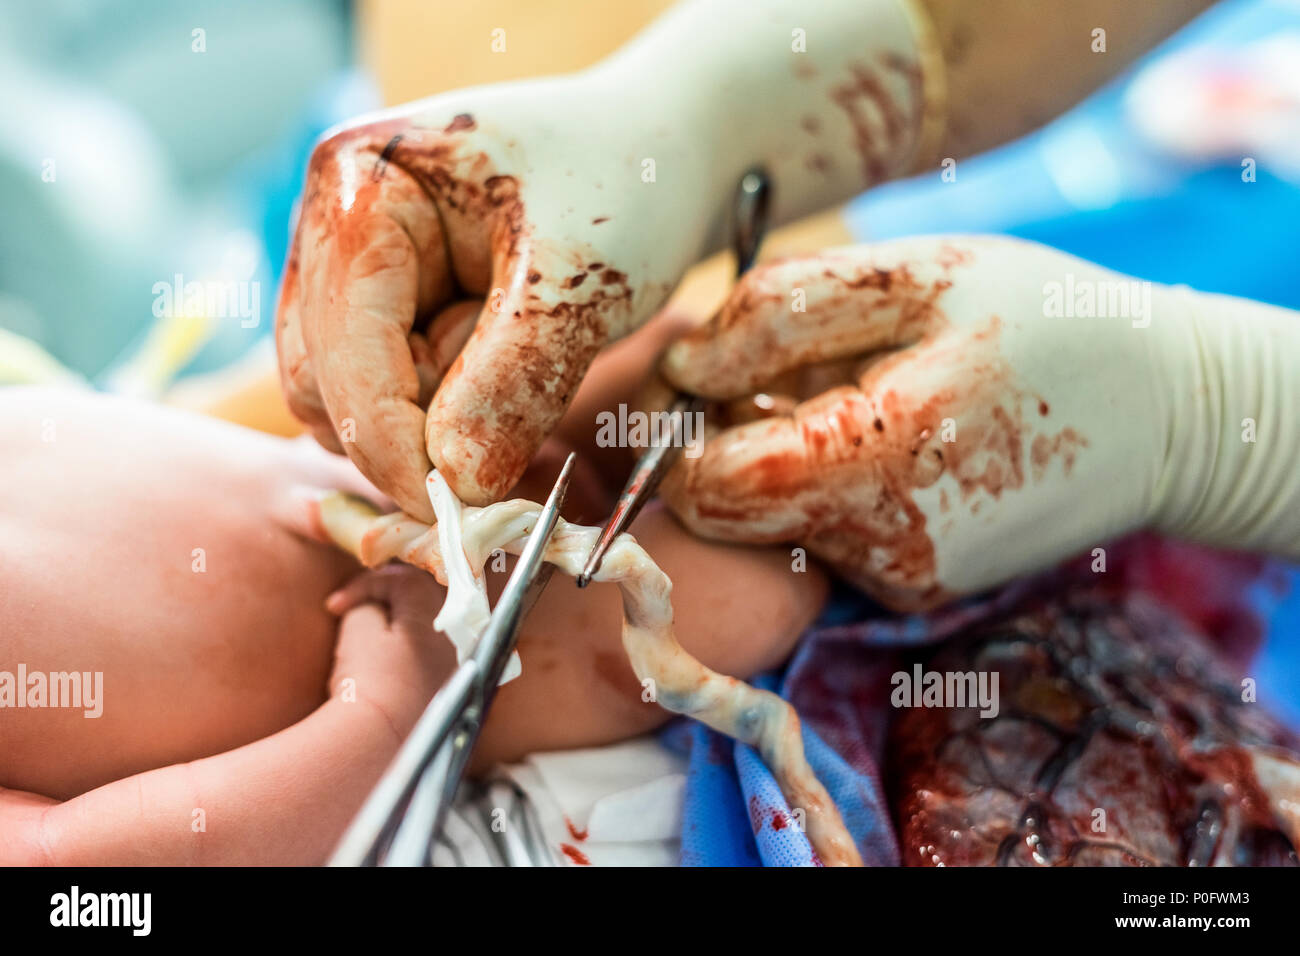 Father cuts the umbilical cord between a newborn baby and placenta Stock Photo